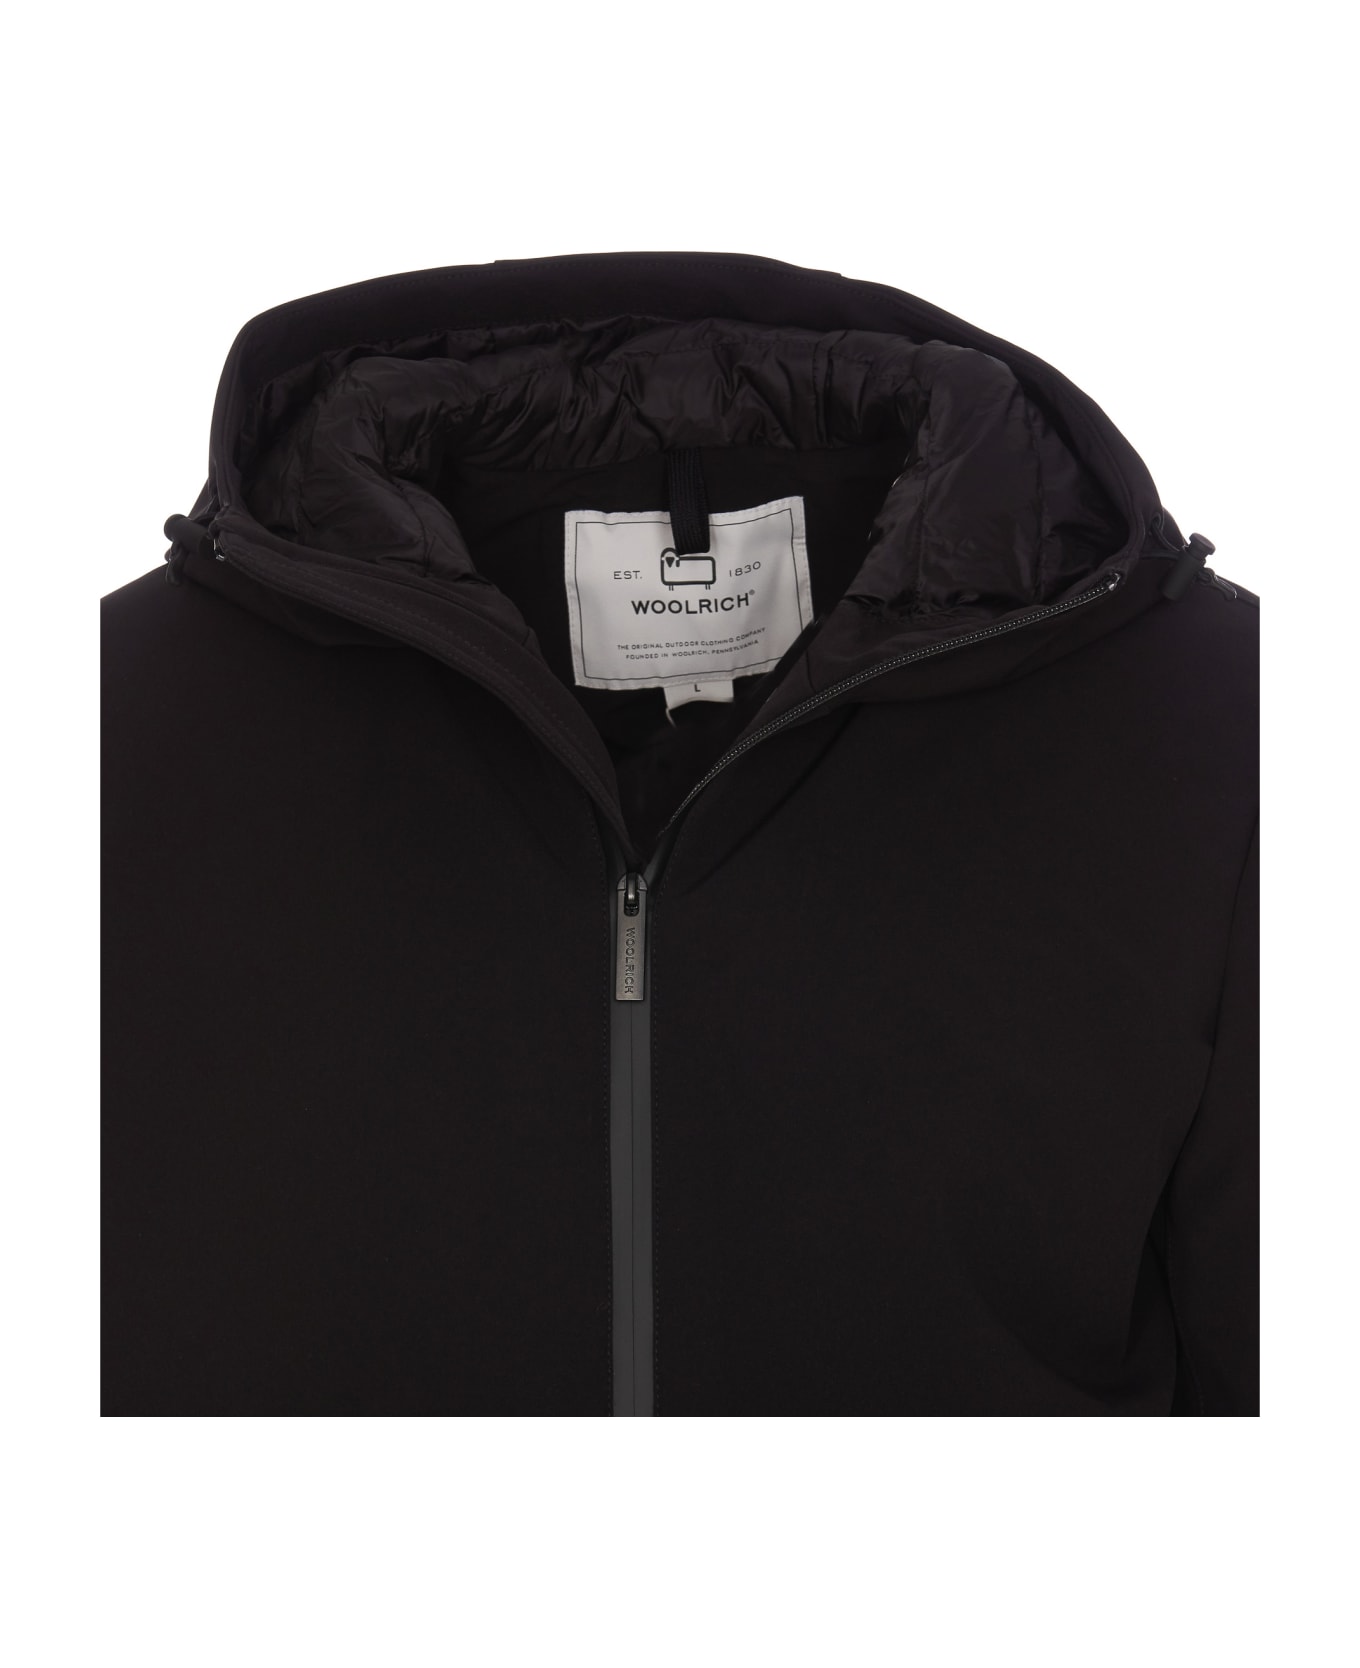 Woolrich Pacific Soft Shell Down Jacket - Black